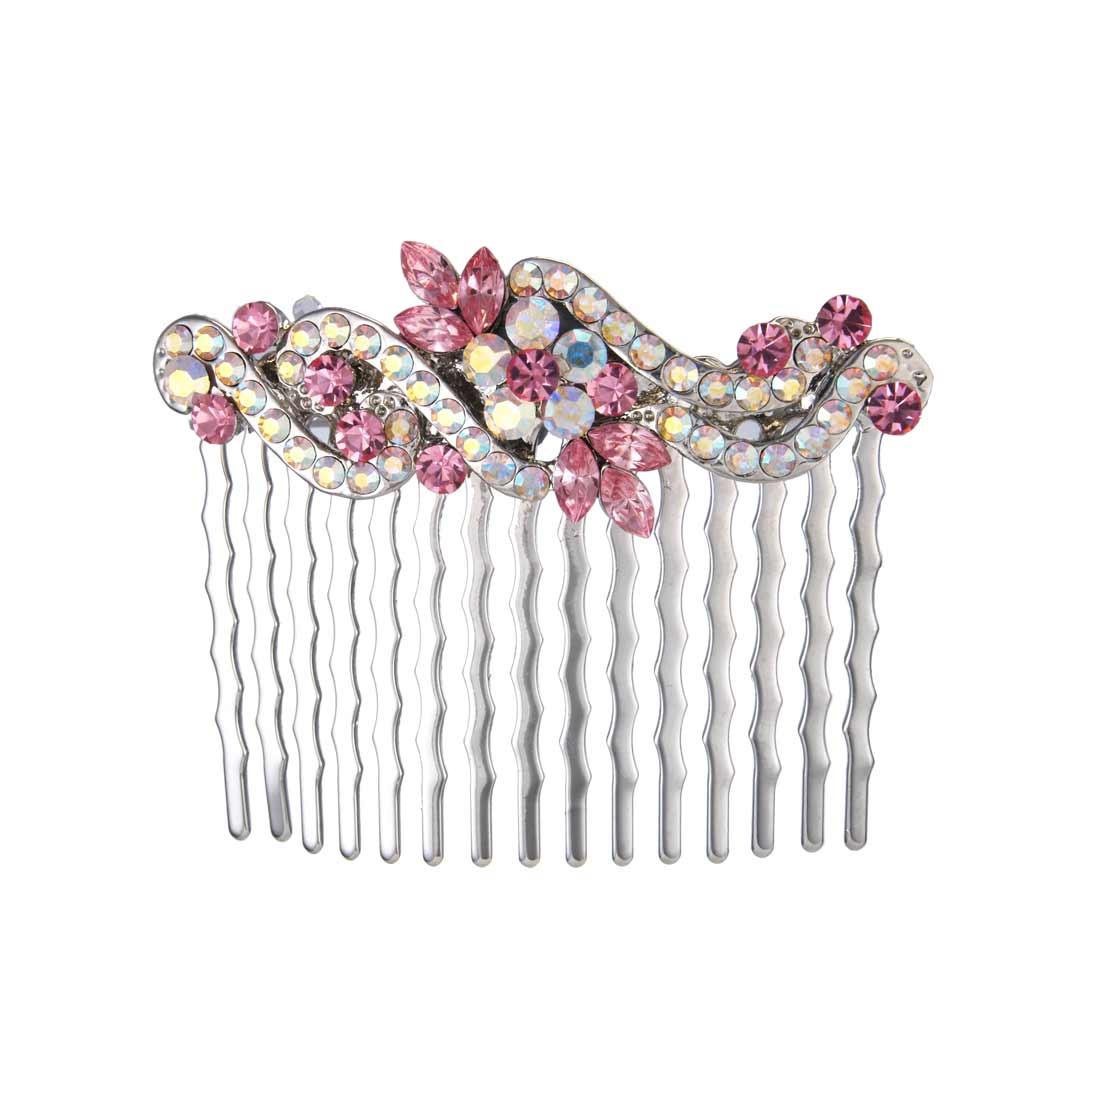 Pretty in Pink Crystal Hair Comb for Bridesmaids & Wedding Guests